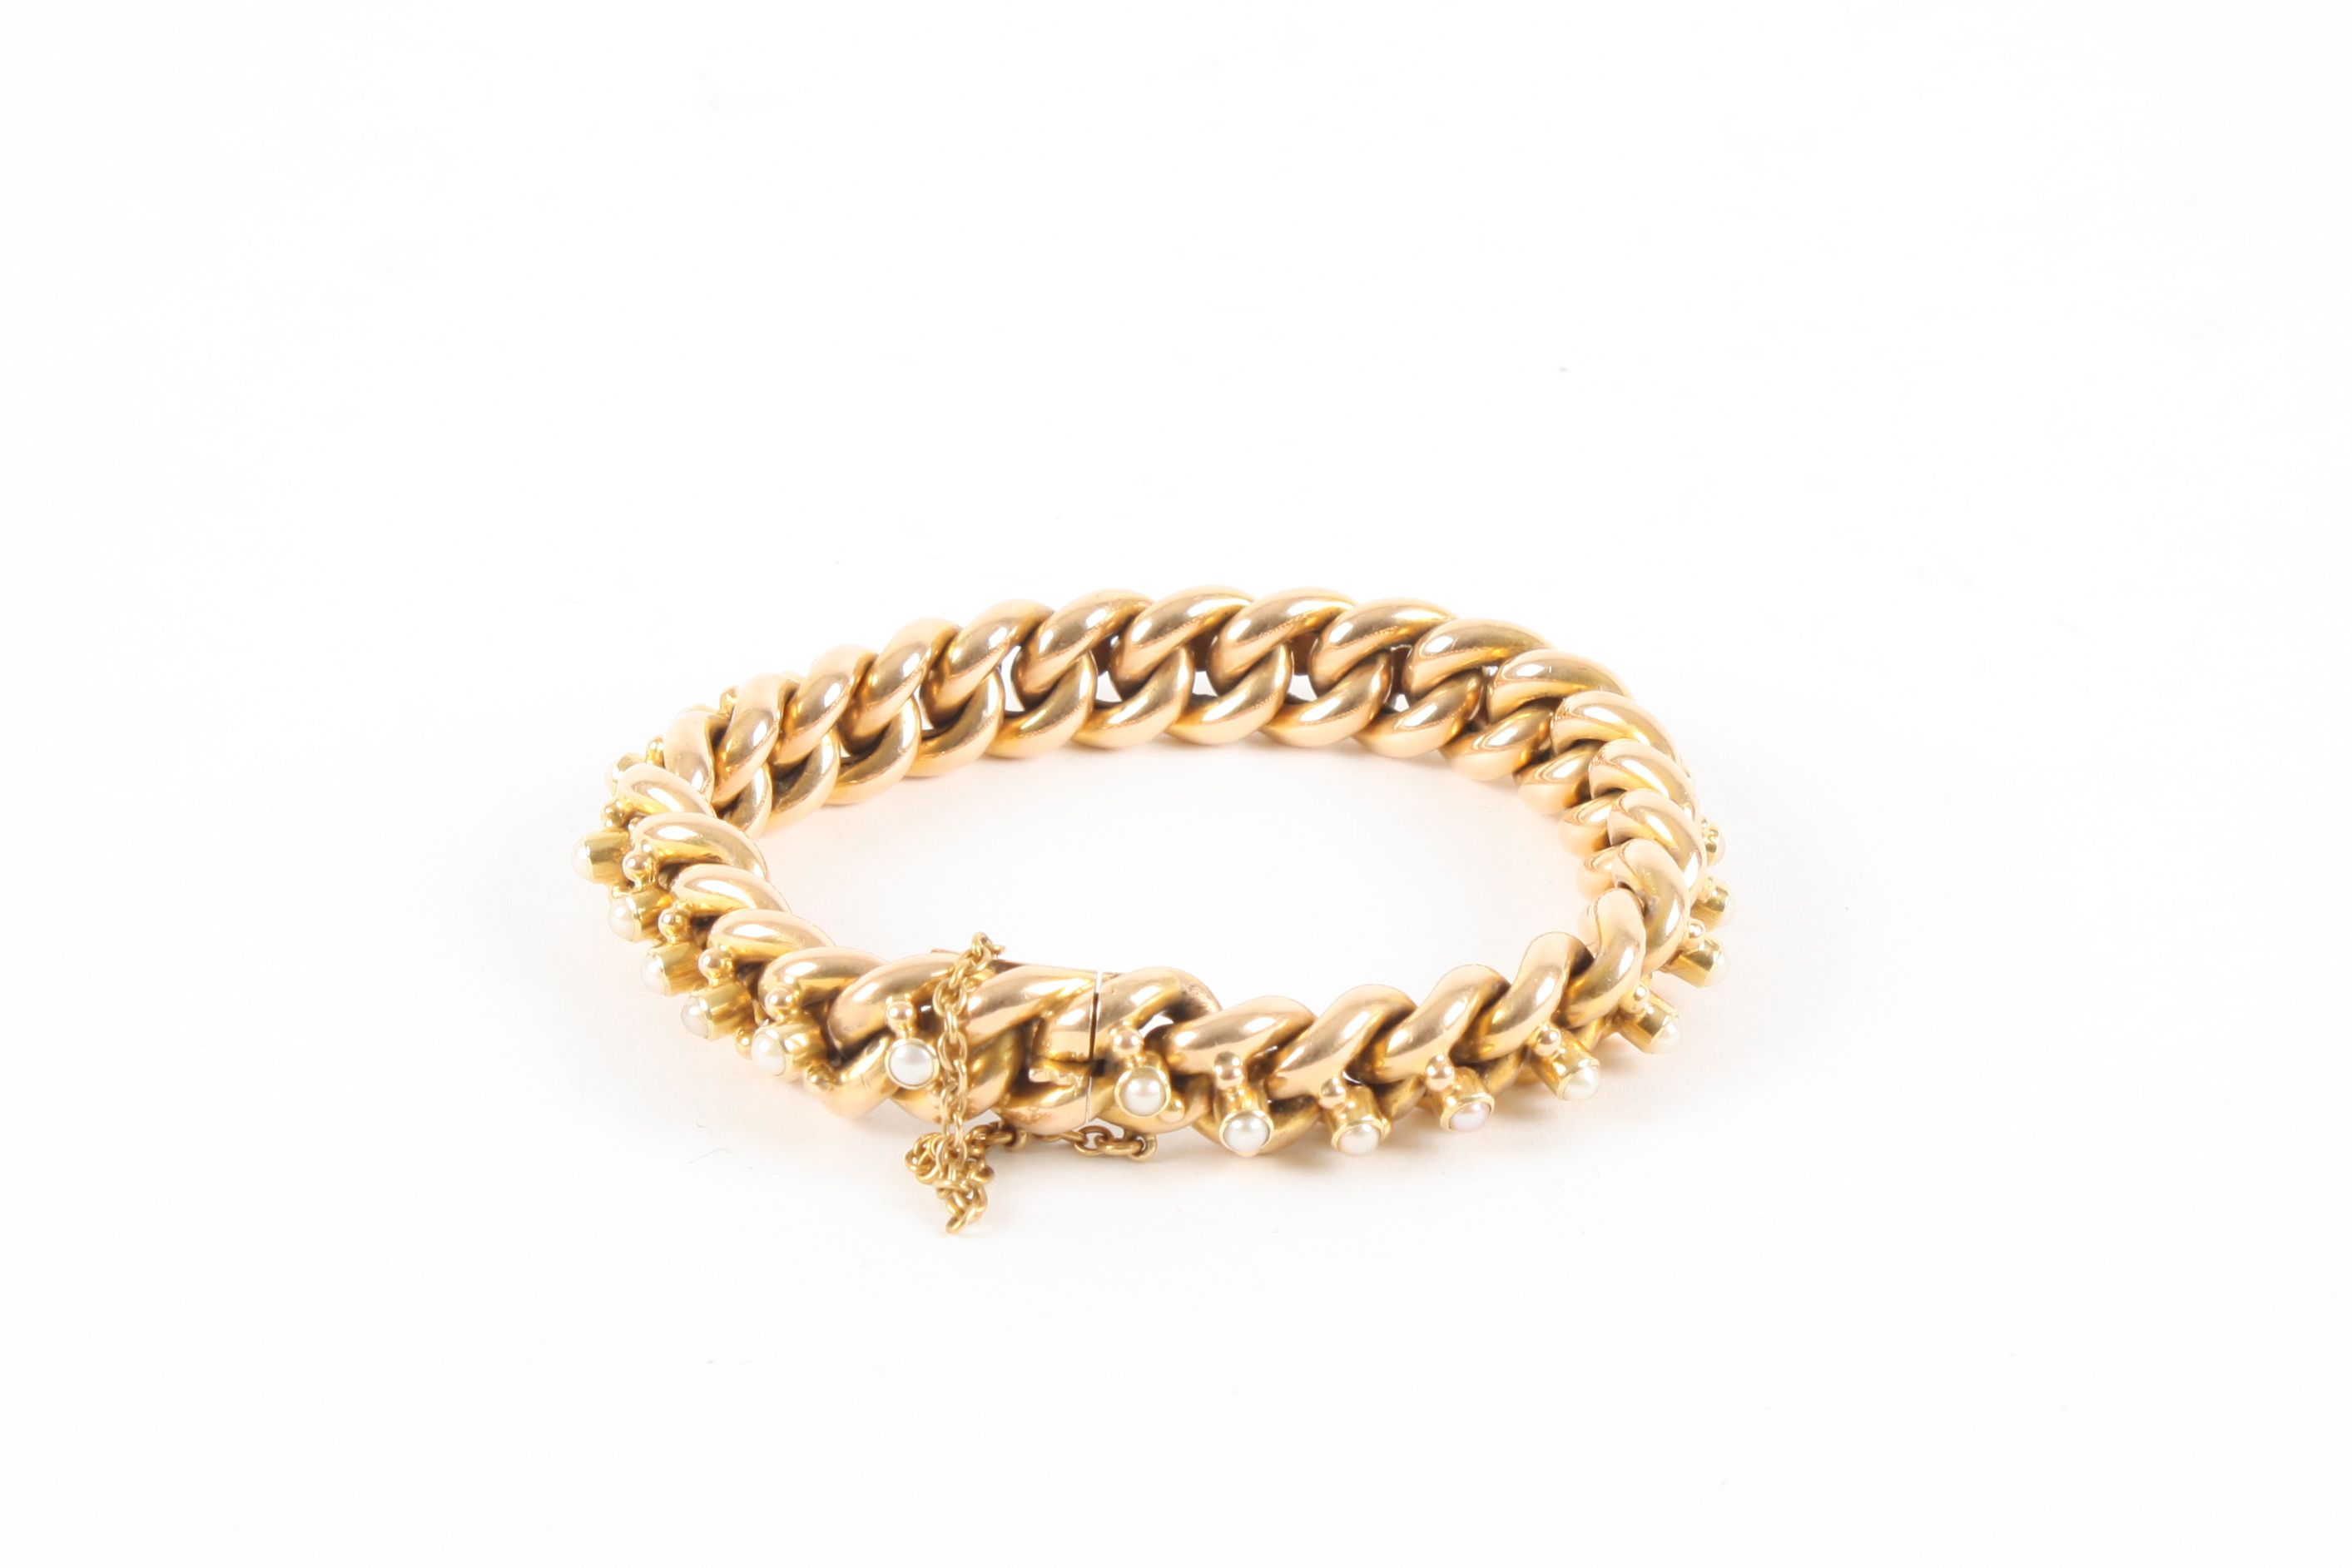 A Victorian 15ct yellow gold and seed pearl bracelet converted from a chain, each link set with a